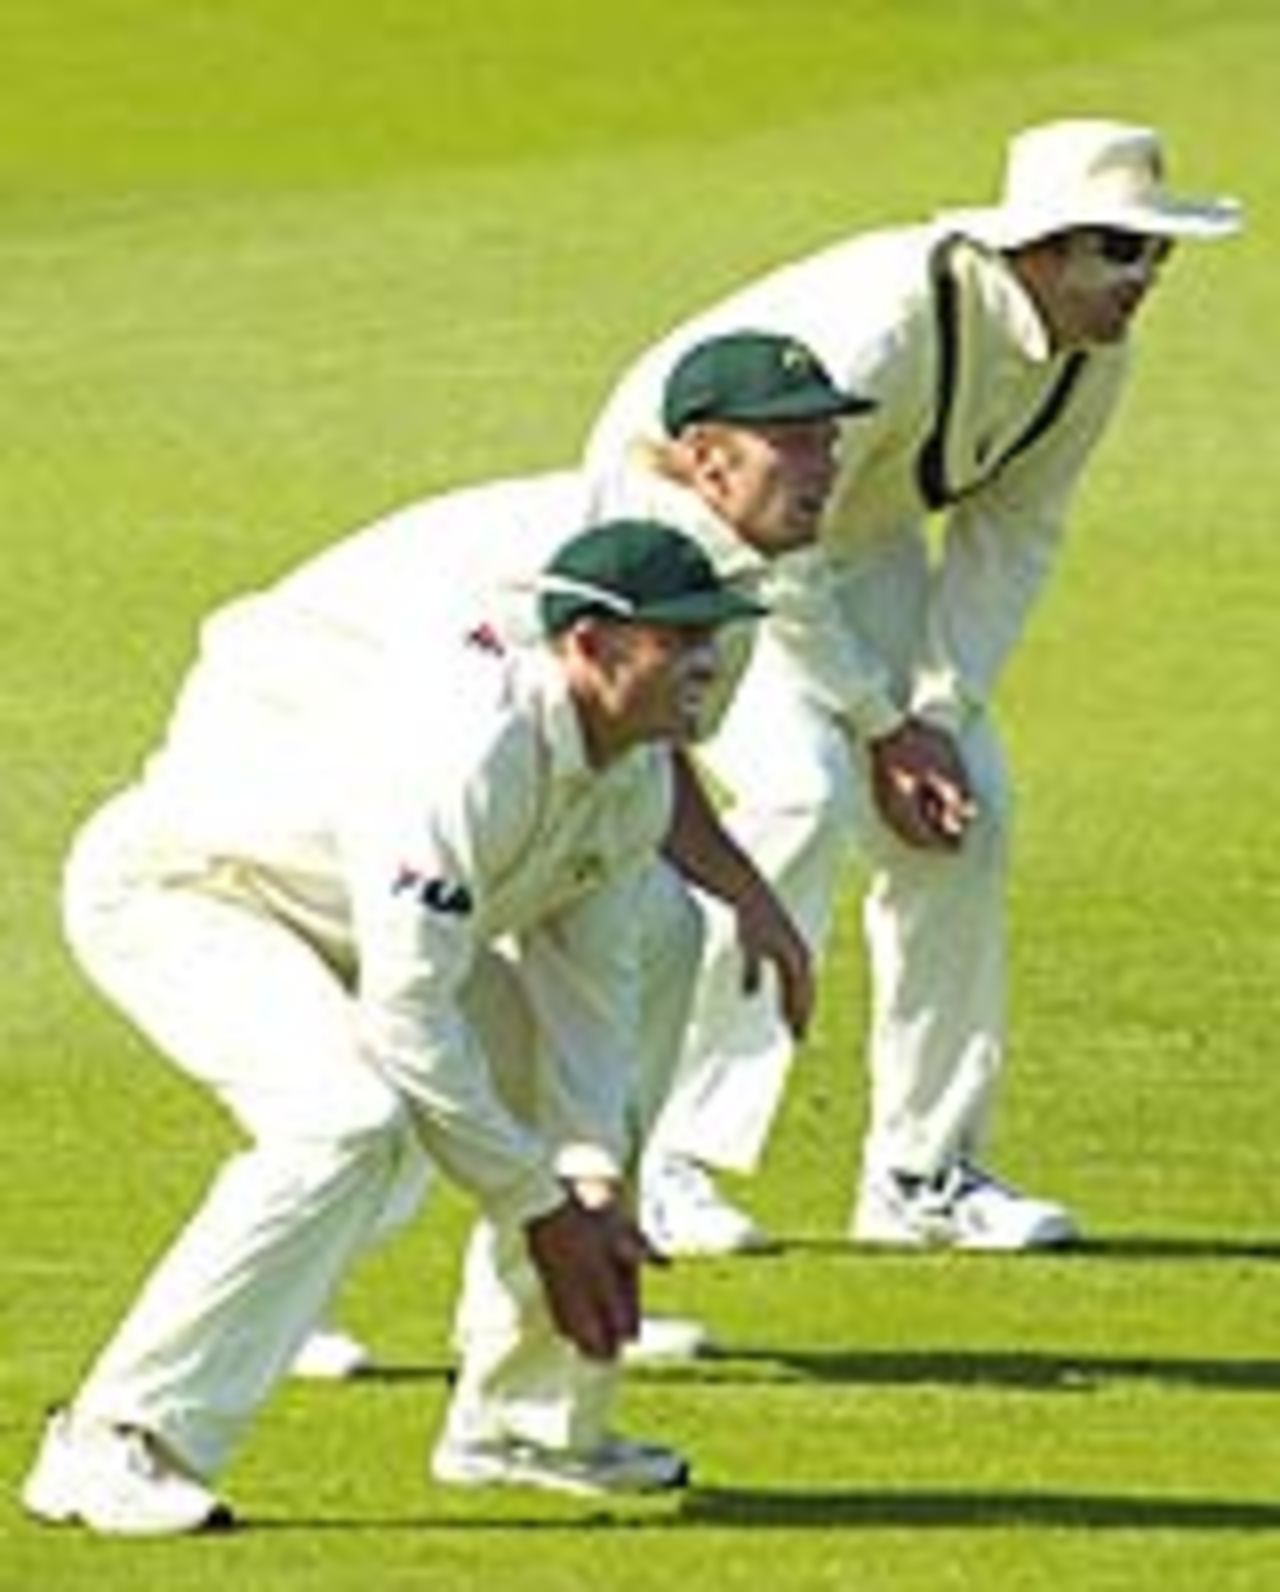 Born slippy. Mike Hussey, Cameron White and Martin Love wait patiently for an edge, Australia A v Indians, tour game, Hobart, 2nd day, December 20, 2003